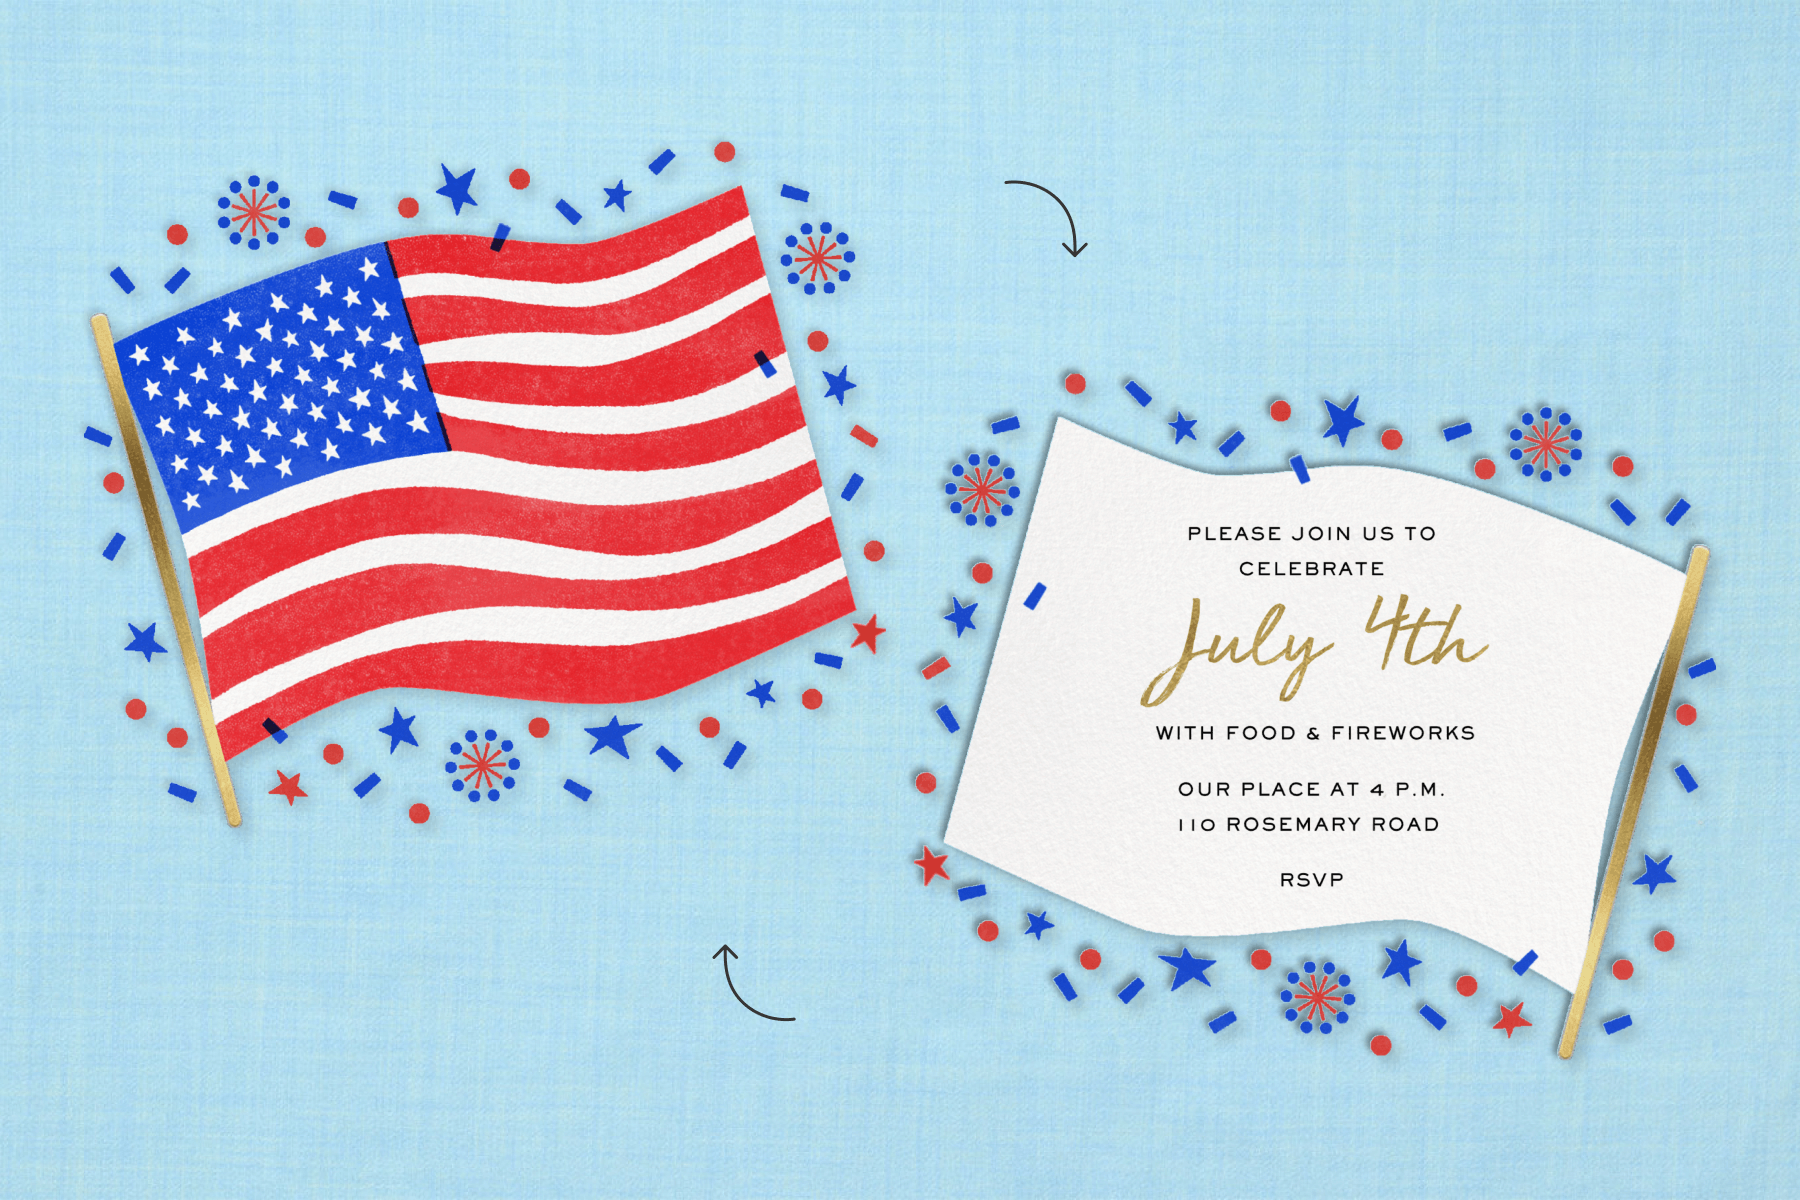 An invitation shaped like an American flag with confetti and fireworks around it, and the reverse with party details.